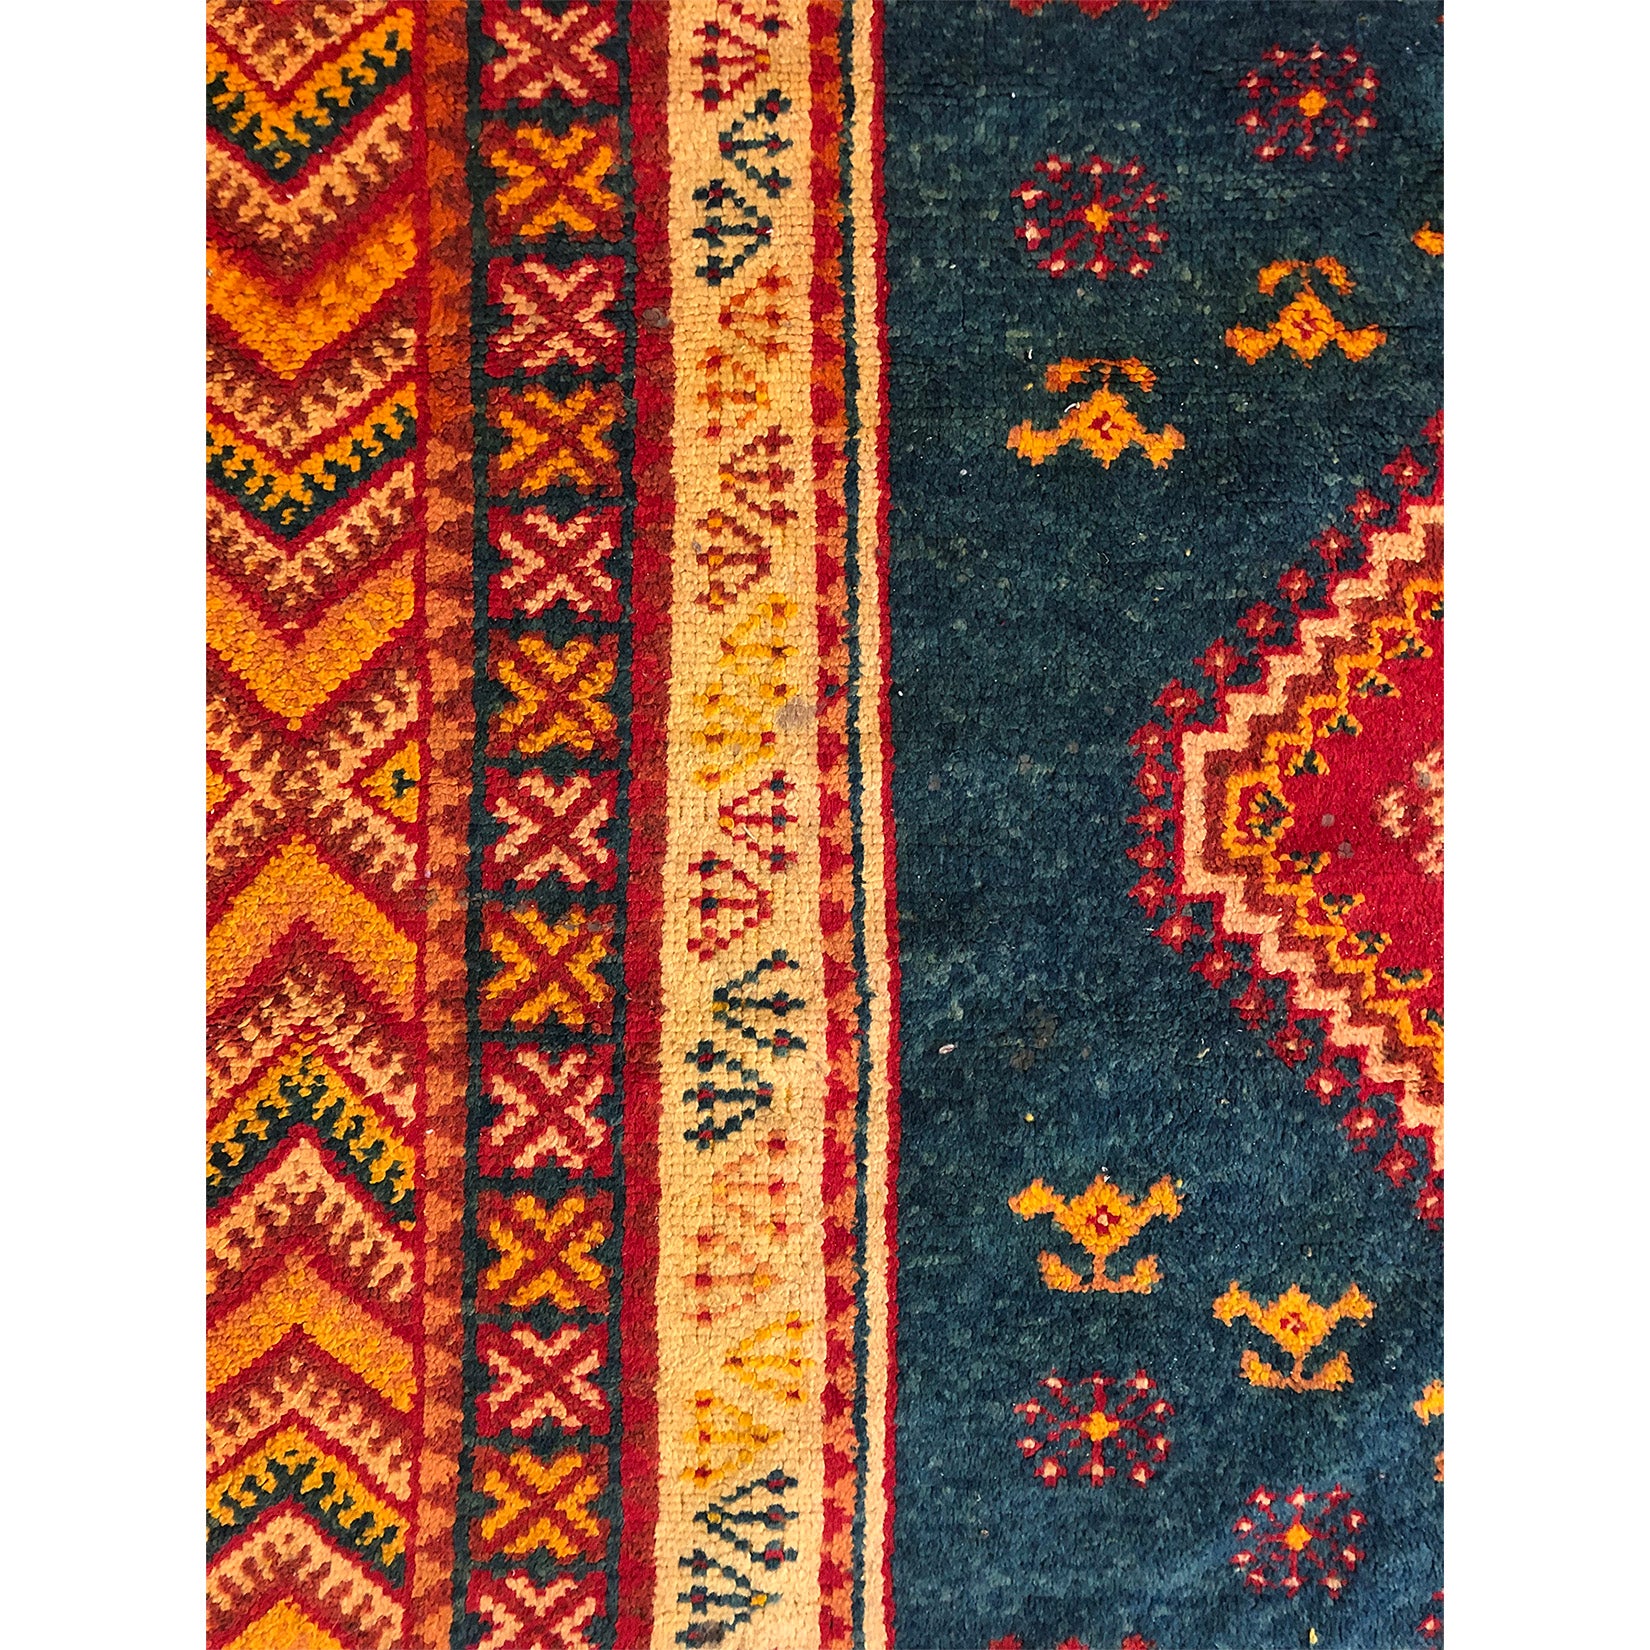 Authentic rust colored Moroccan tribal rug - Kantara | Moroccan Rugs